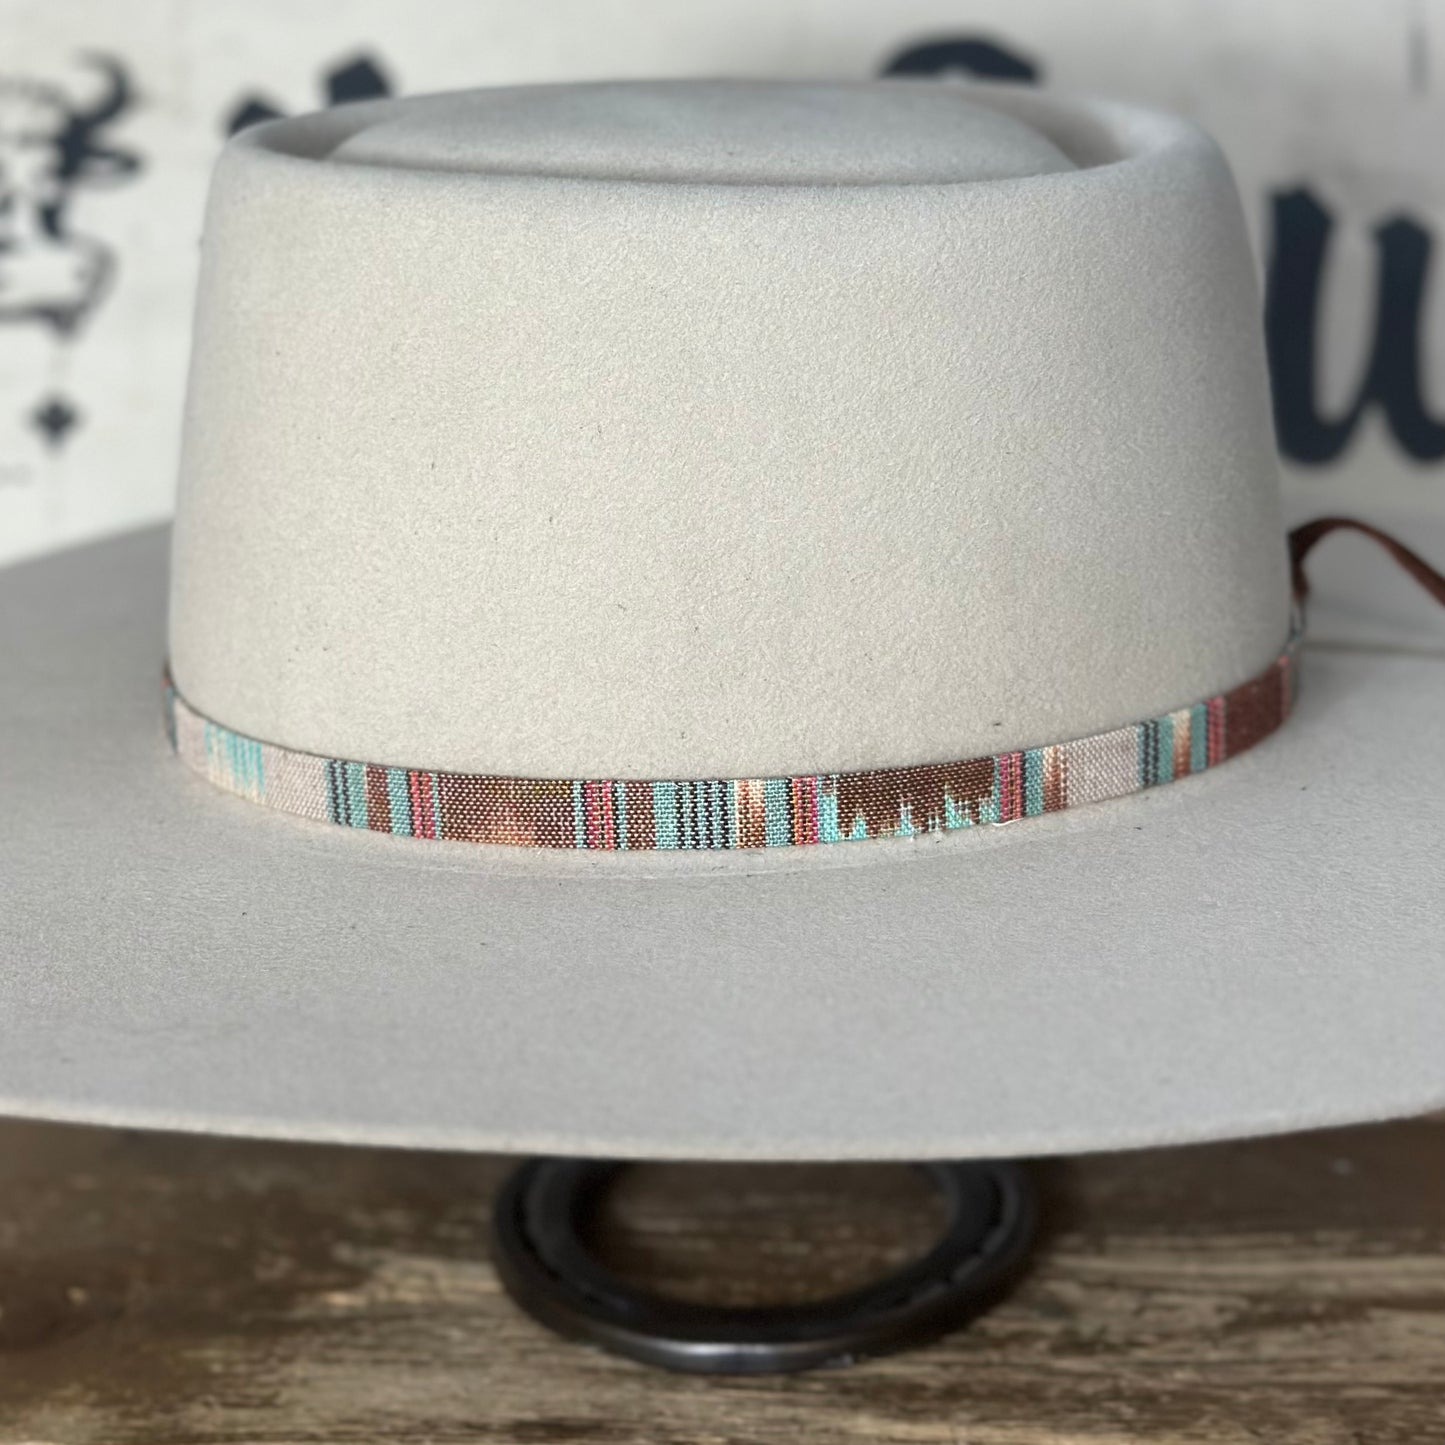 Hatband HB30-10 1/2" Tapestry Tan/Maroon/Turq/Red/Gold